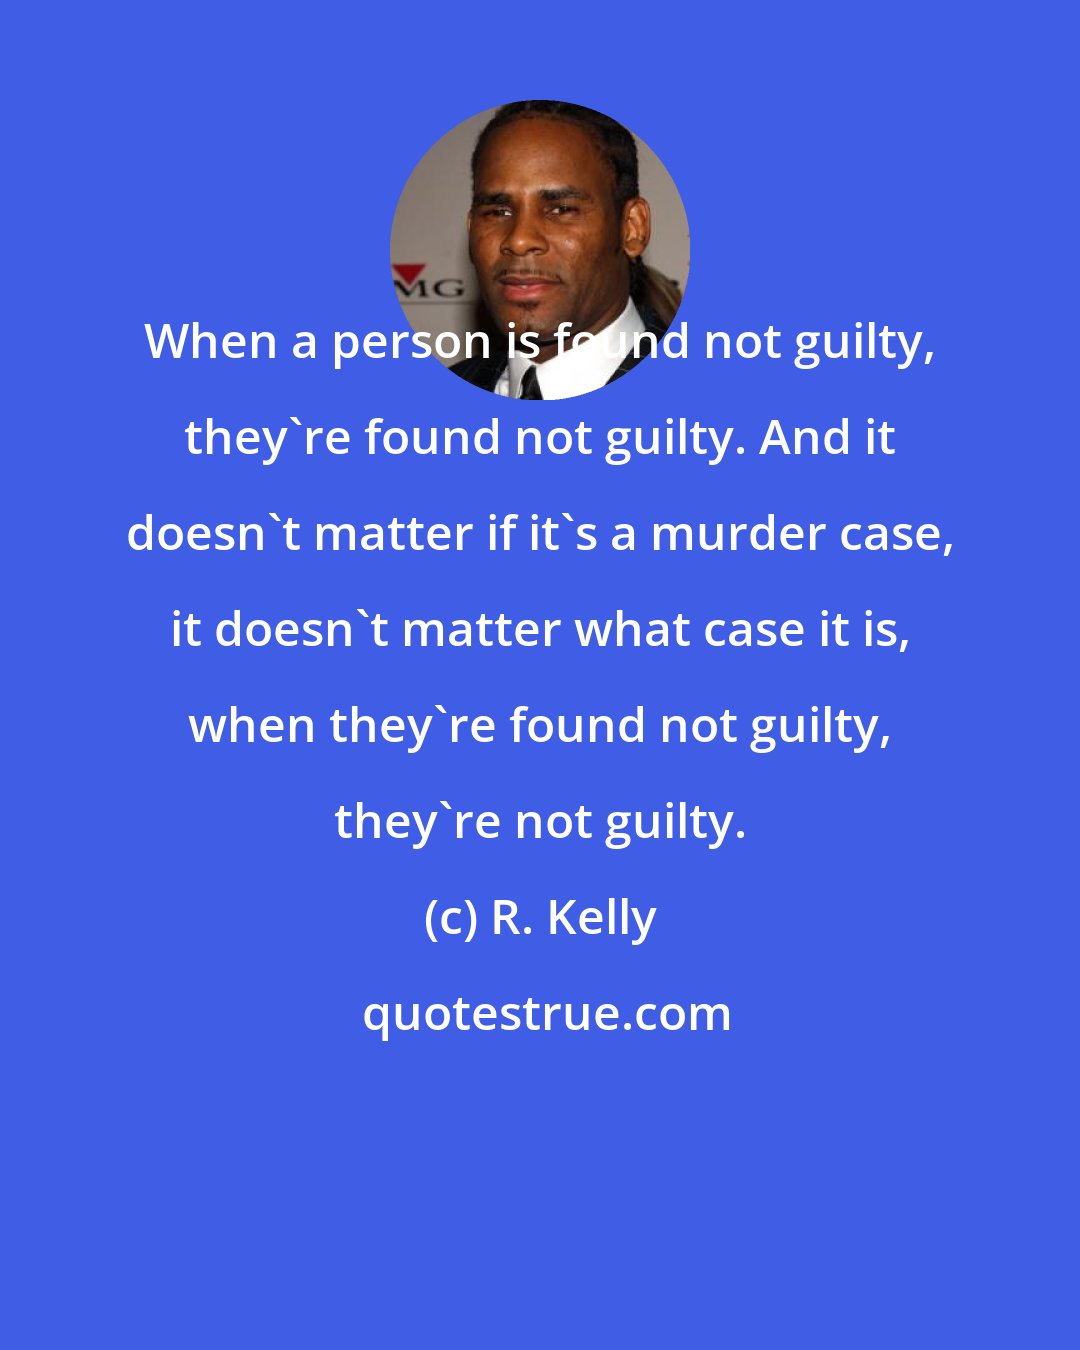 R. Kelly: When a person is found not guilty, they're found not guilty. And it doesn't matter if it's a murder case, it doesn't matter what case it is, when they're found not guilty, they're not guilty.